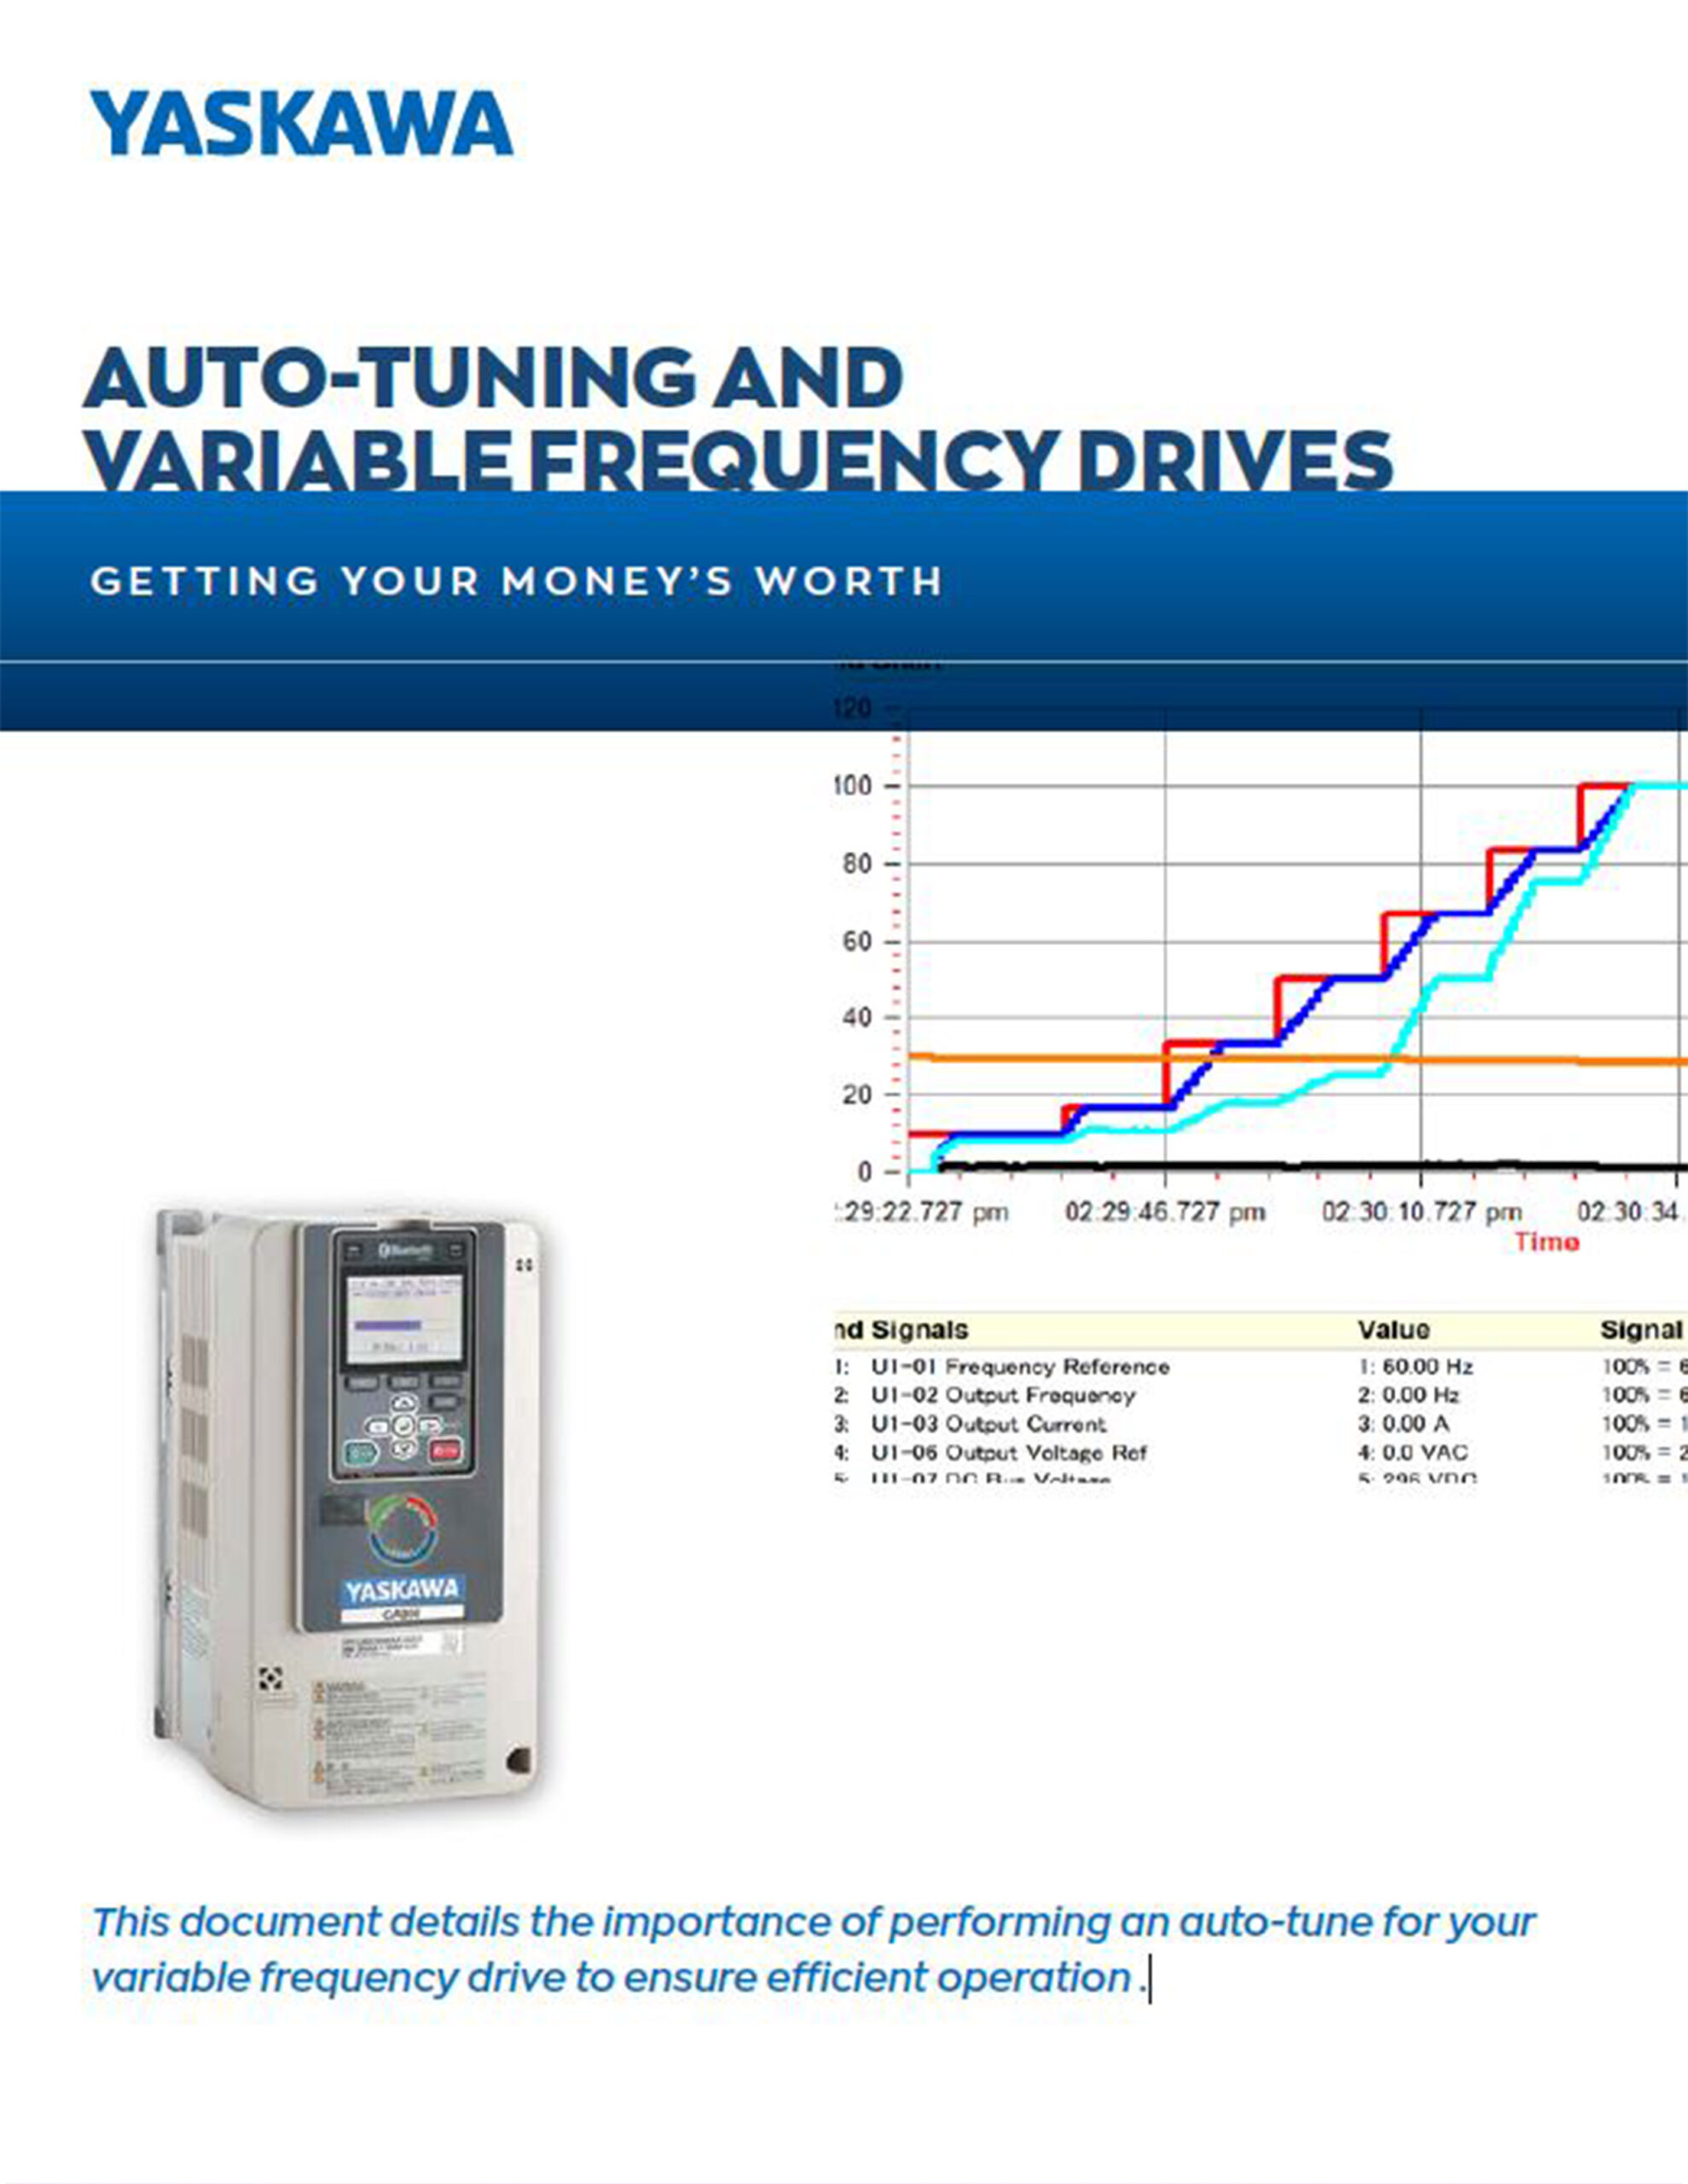 Yaskawa: Auto-Tuning and Variable Frequency Drives